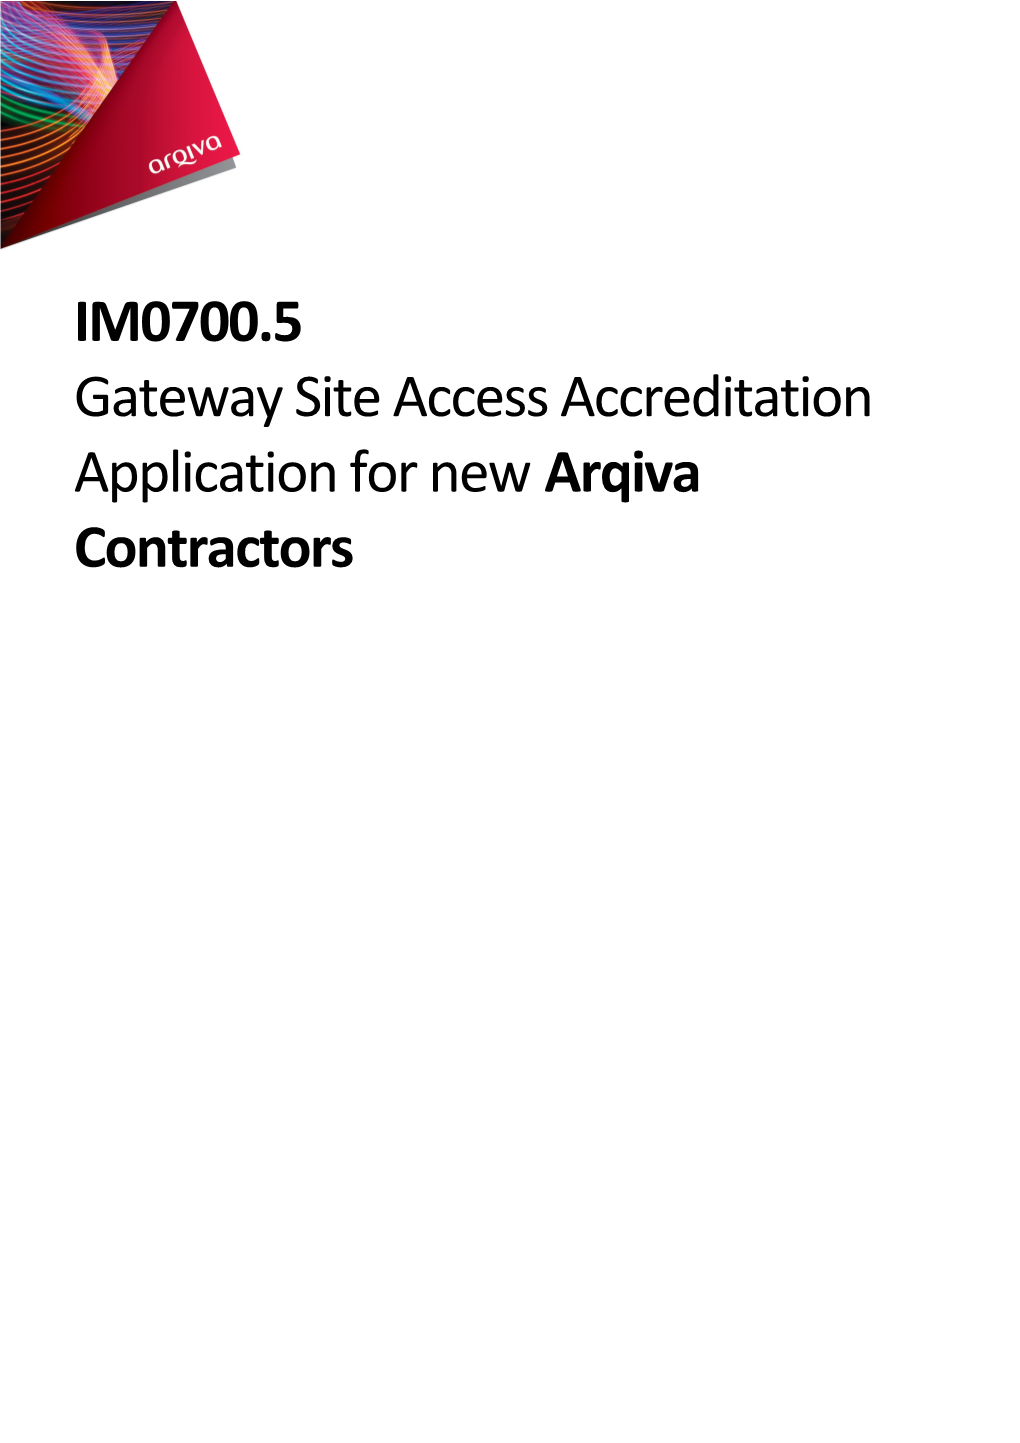 Gateway Site Access Accreditation Application for New Arqiva Contractors